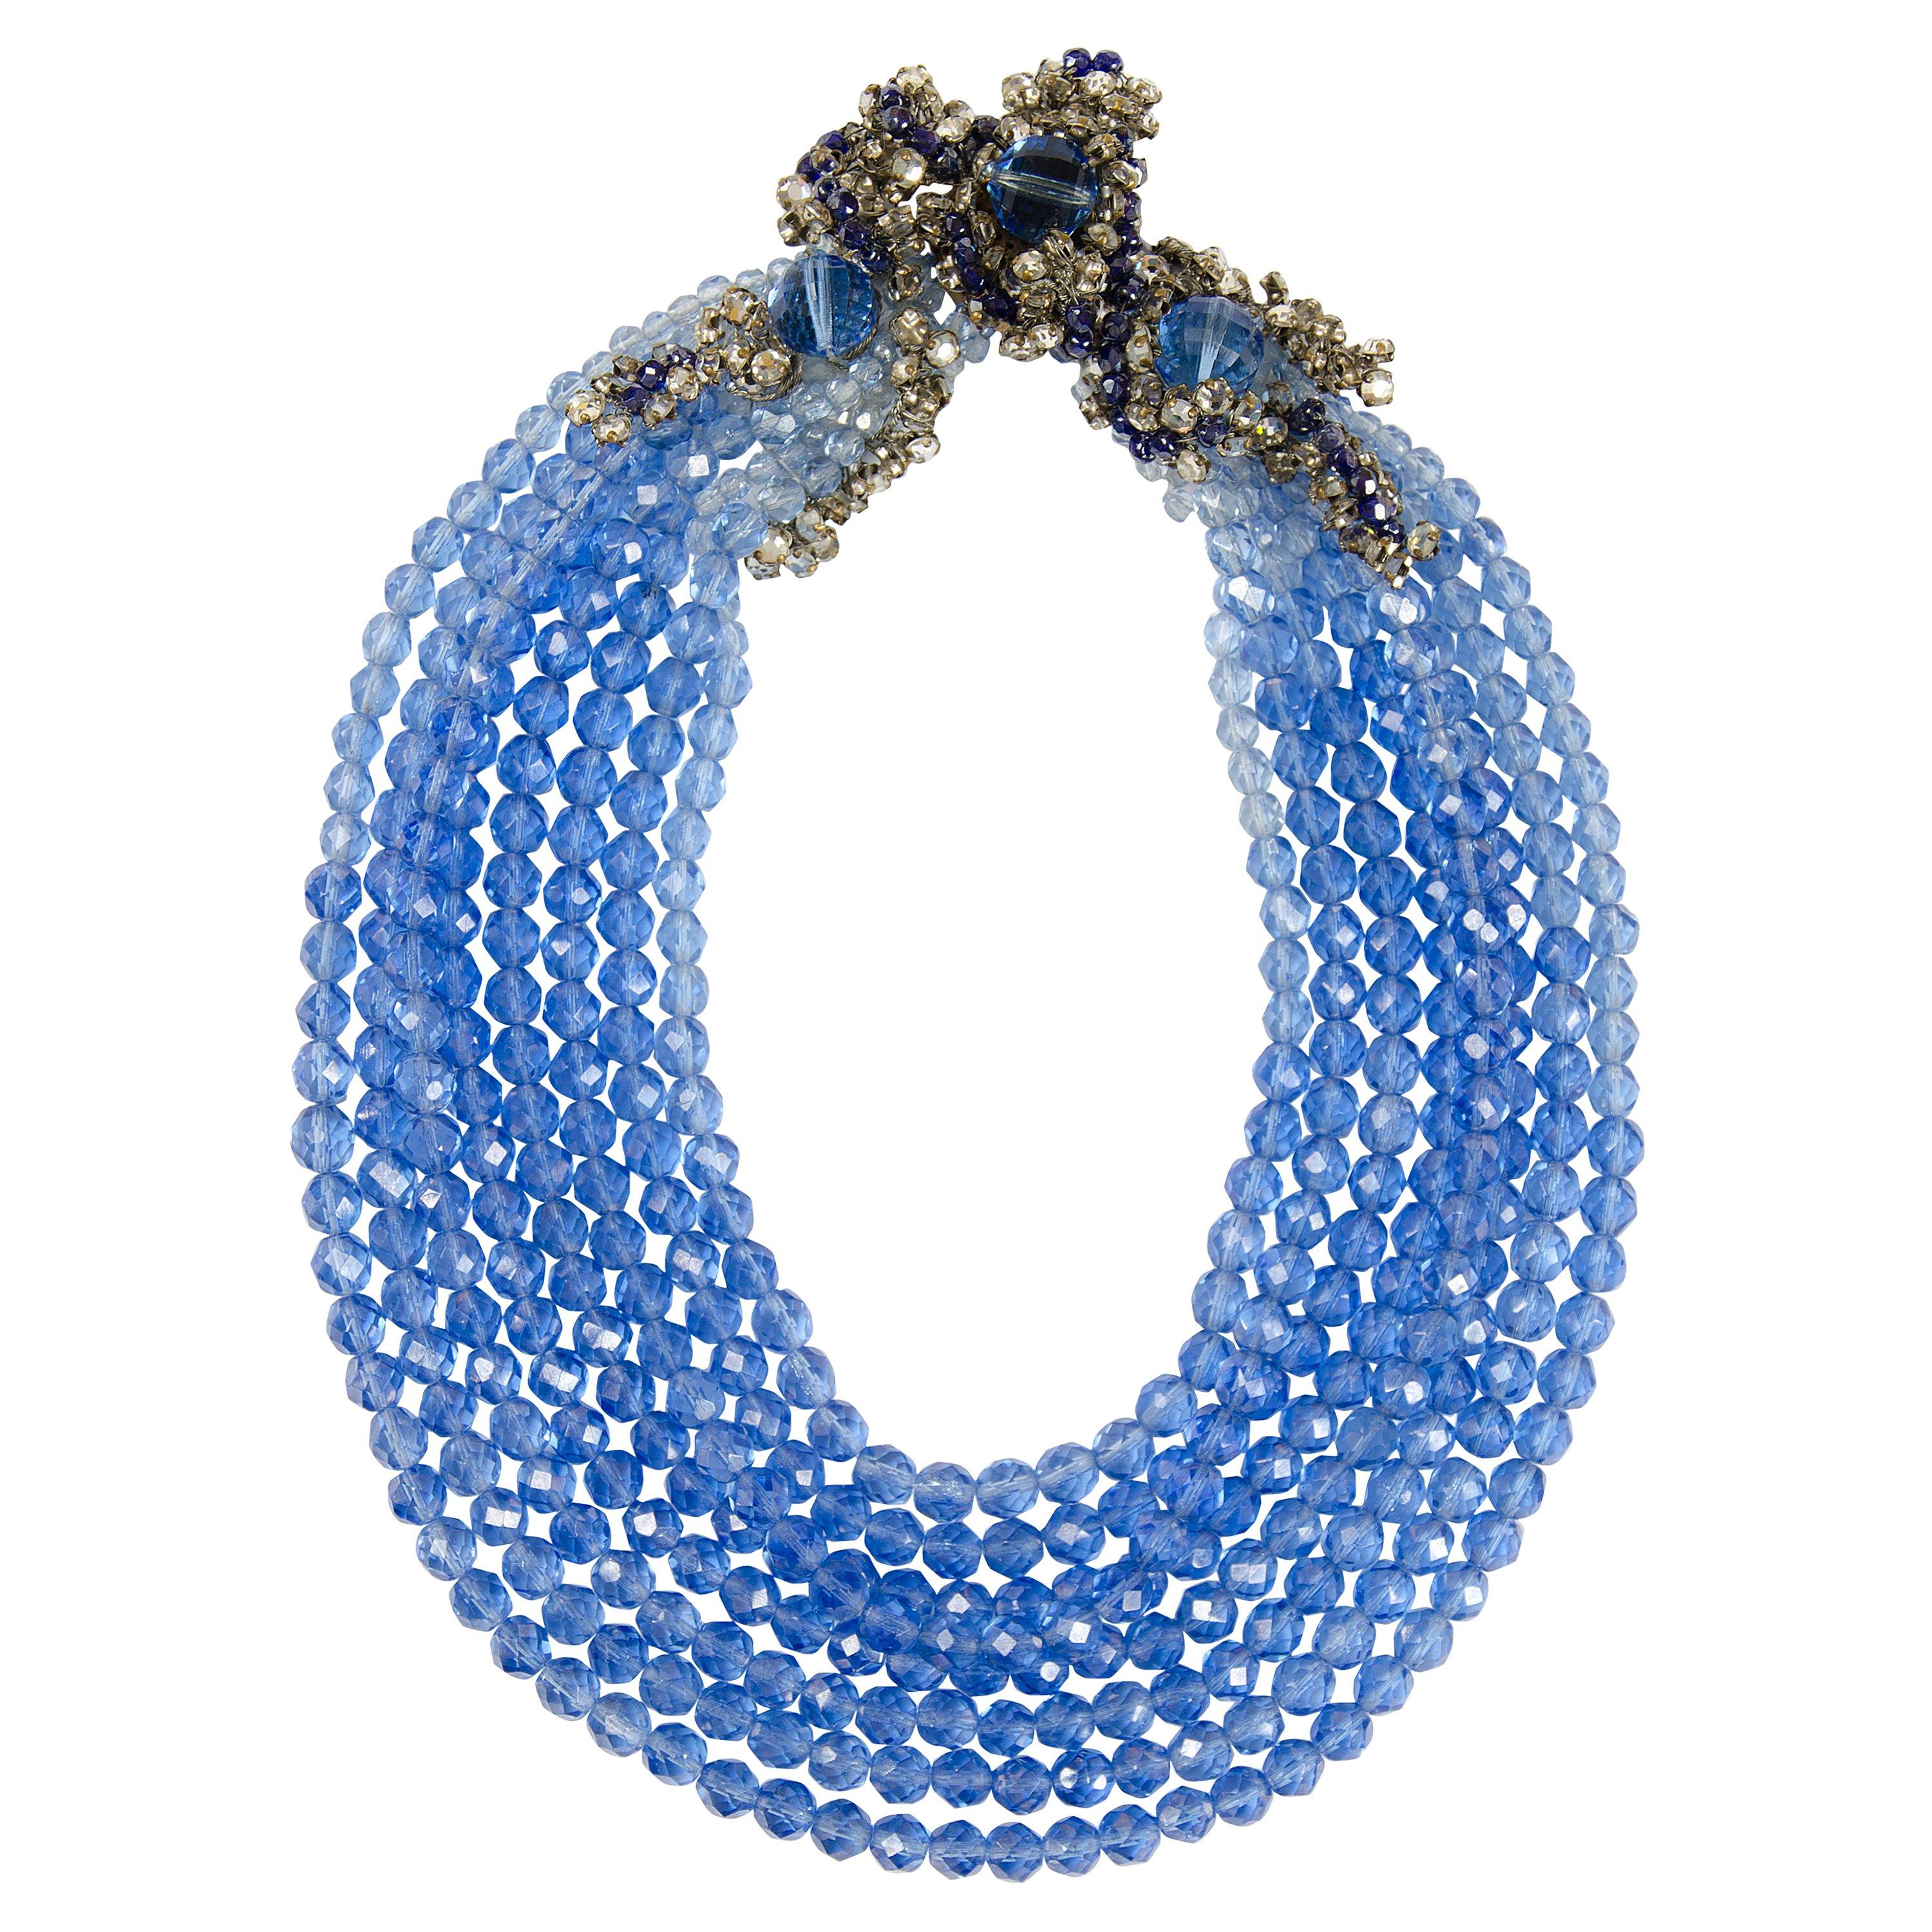 An exceptional and highly stylish graduated row necklace by Coppola e Toppo, composed of graded blue half crystal beads, with a sumptuous side decoration, composed of leaf shape elements, made of silver plated wire, paste rose montees and larger